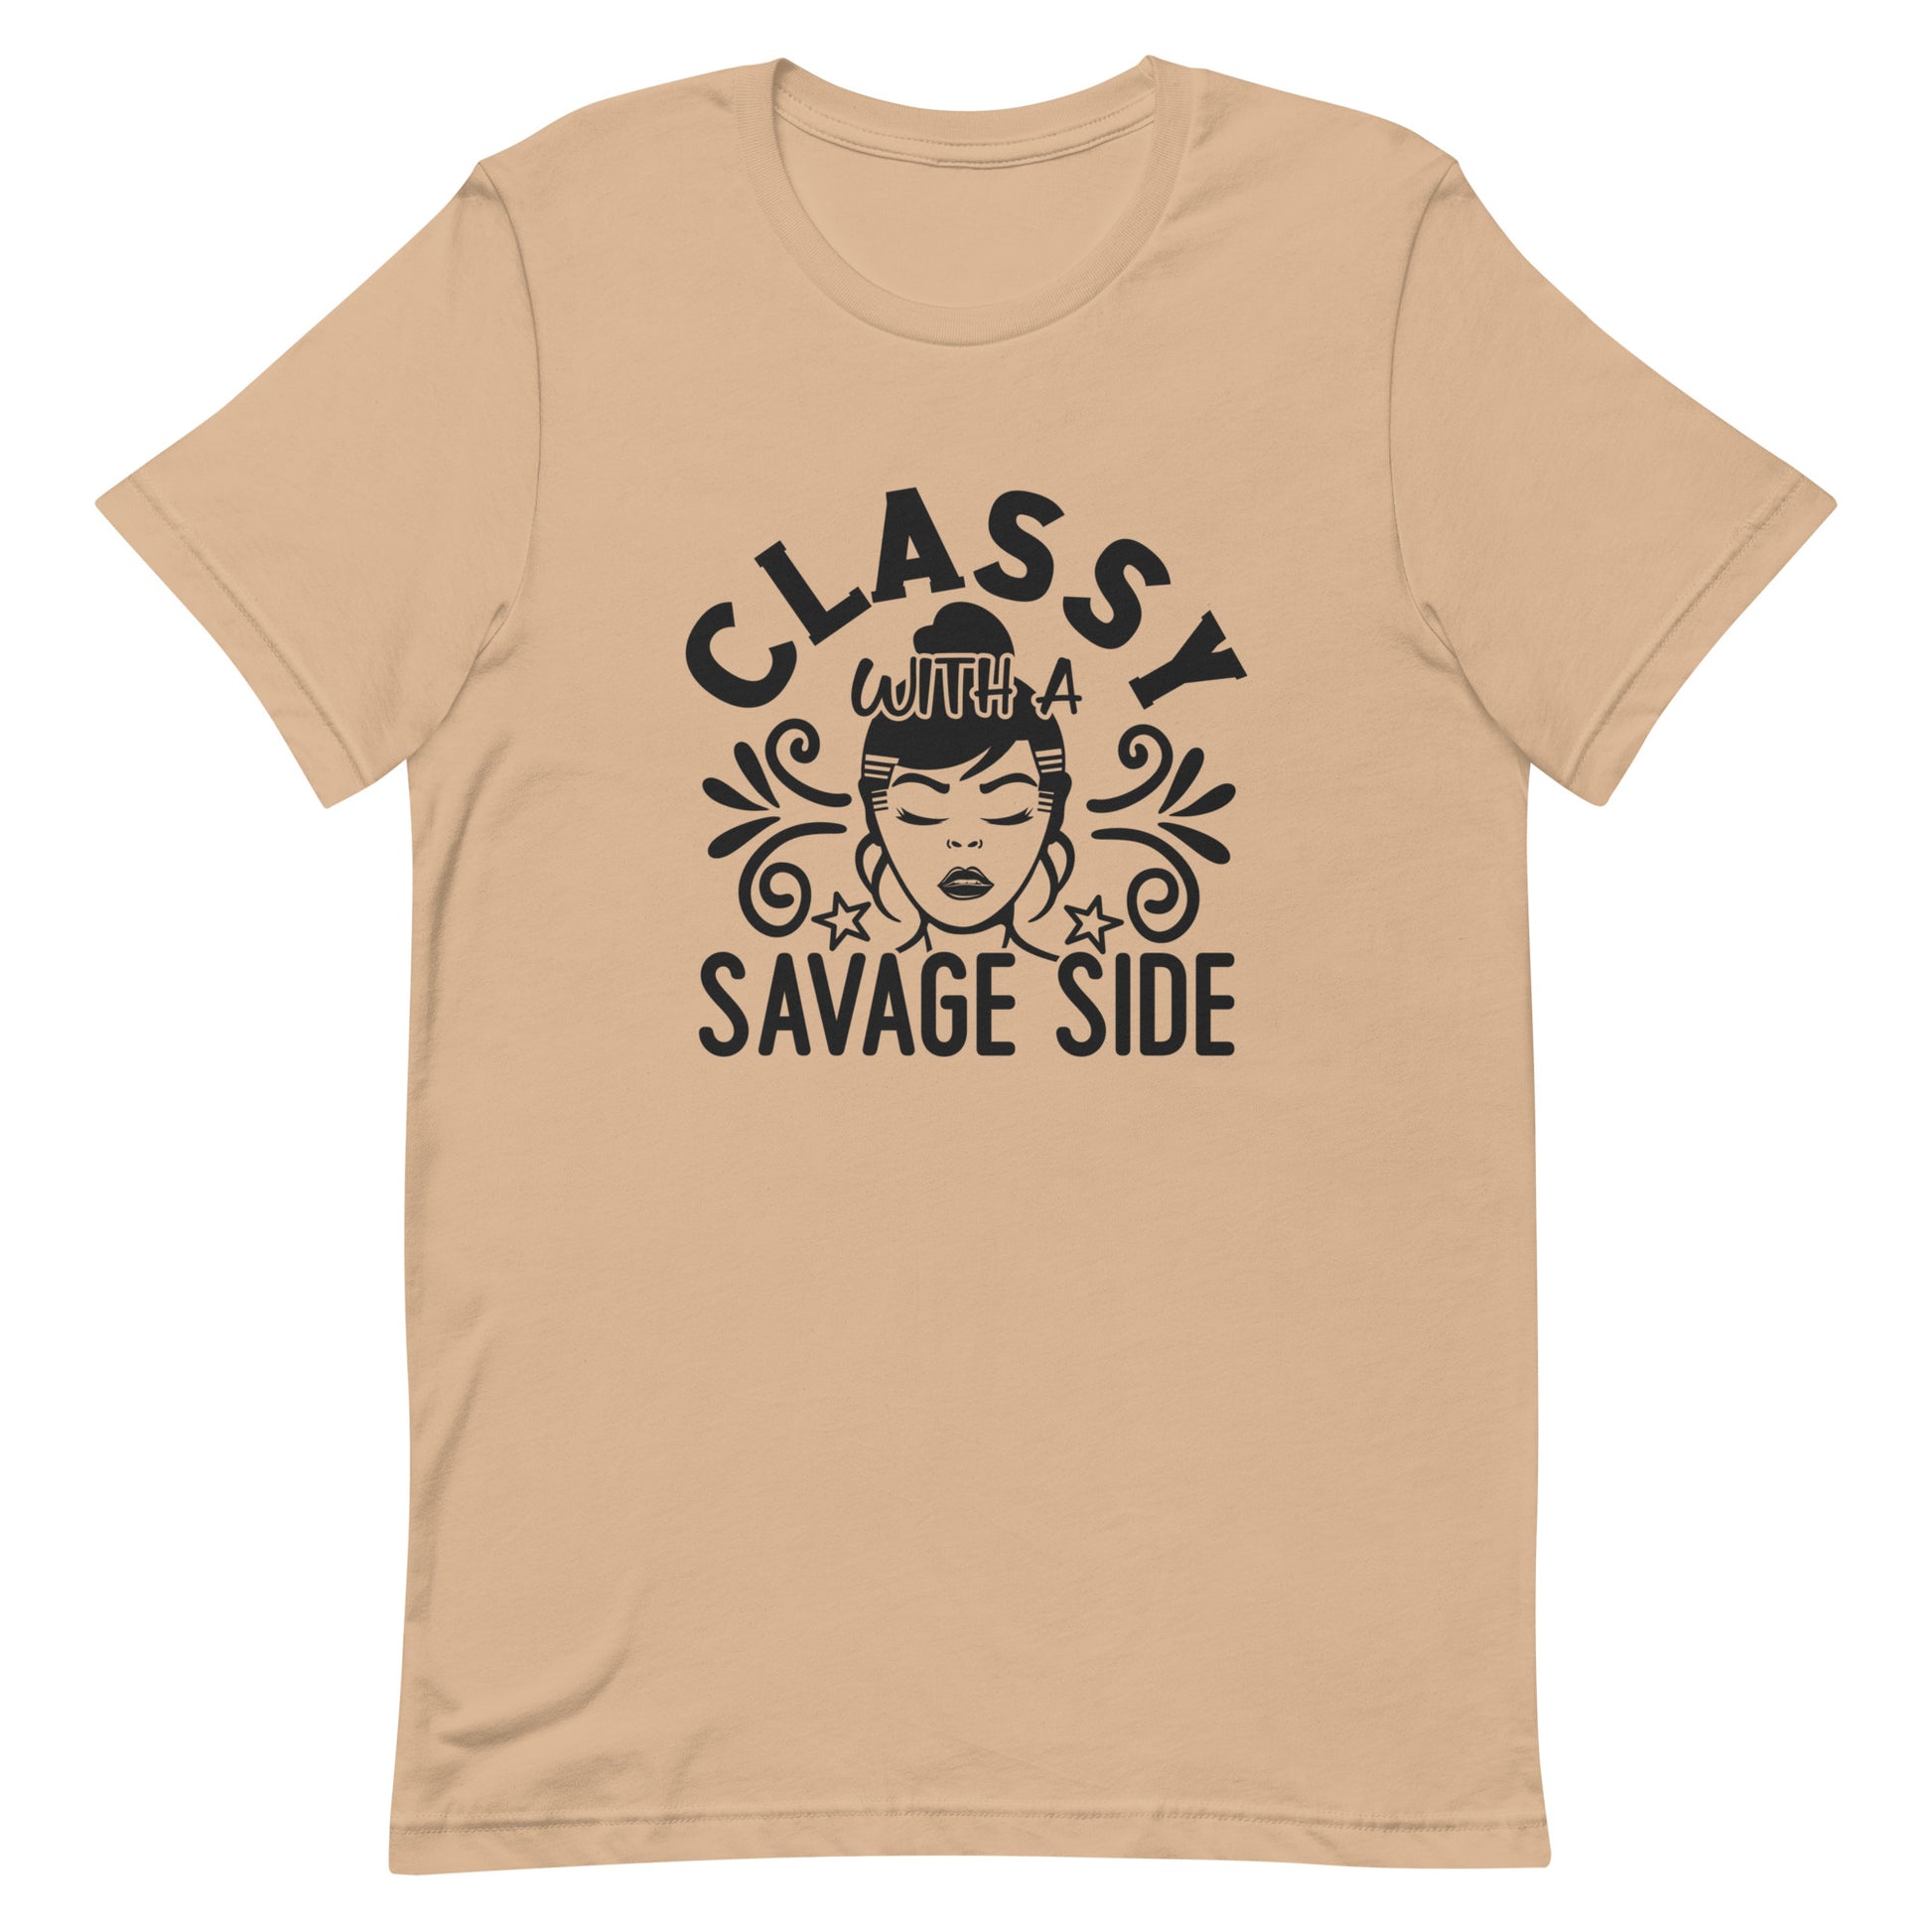 Classy with a Savage Side Unisex T-shirt